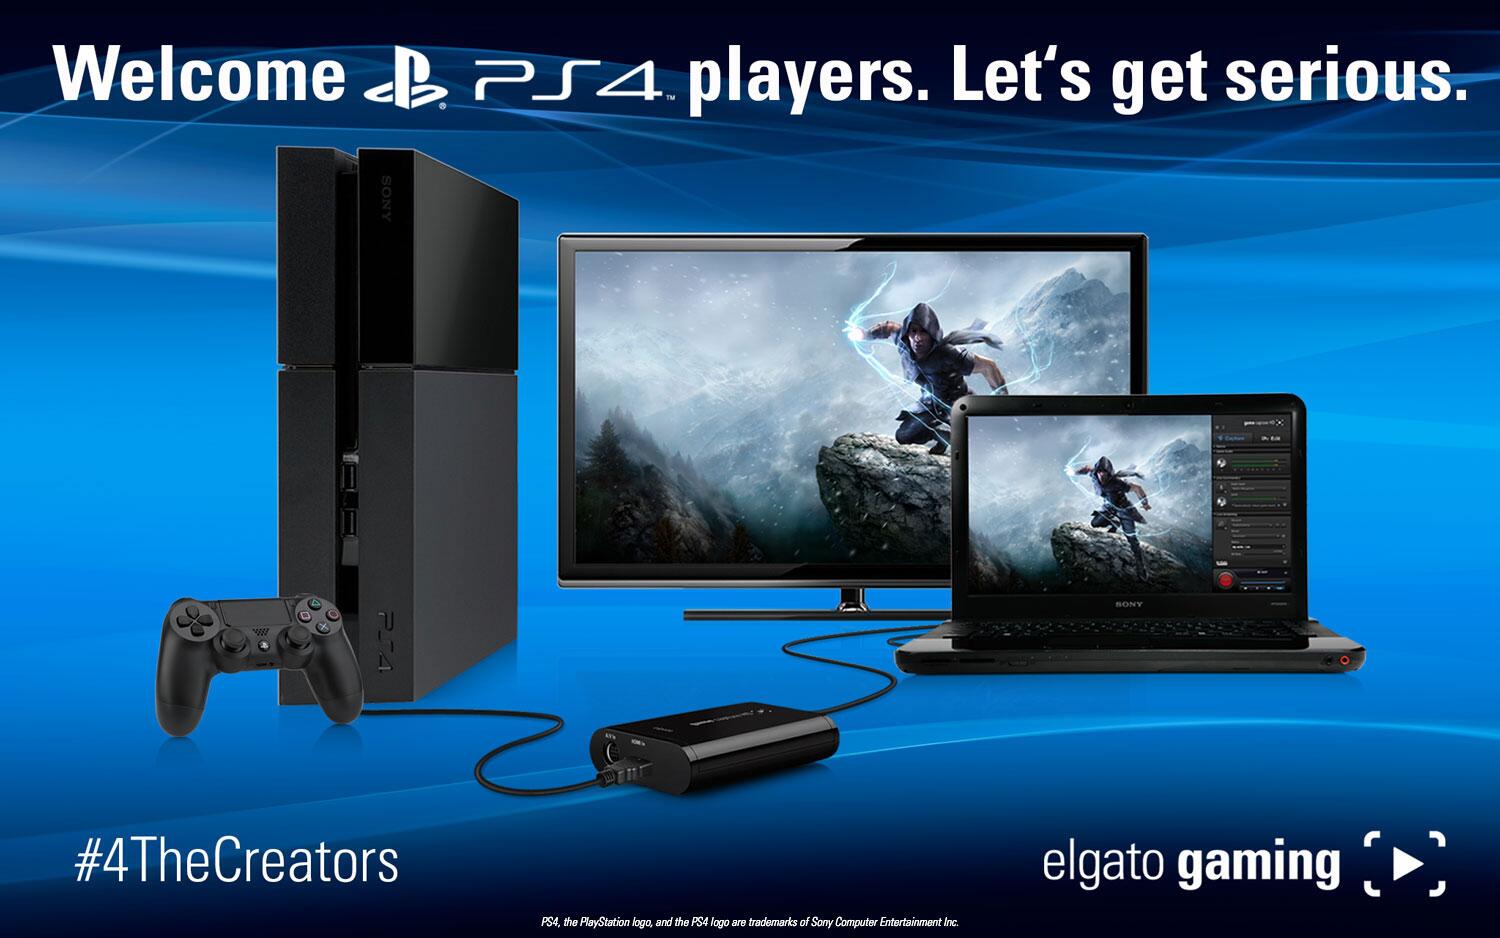 Elgato on Twitter: get serious: PS4 v1.70 is here! Capture stunning 1080p with Elgato Game Capture HD. RT! #4TheCreators http://t.co/IUQdiqKV5B" / Twitter